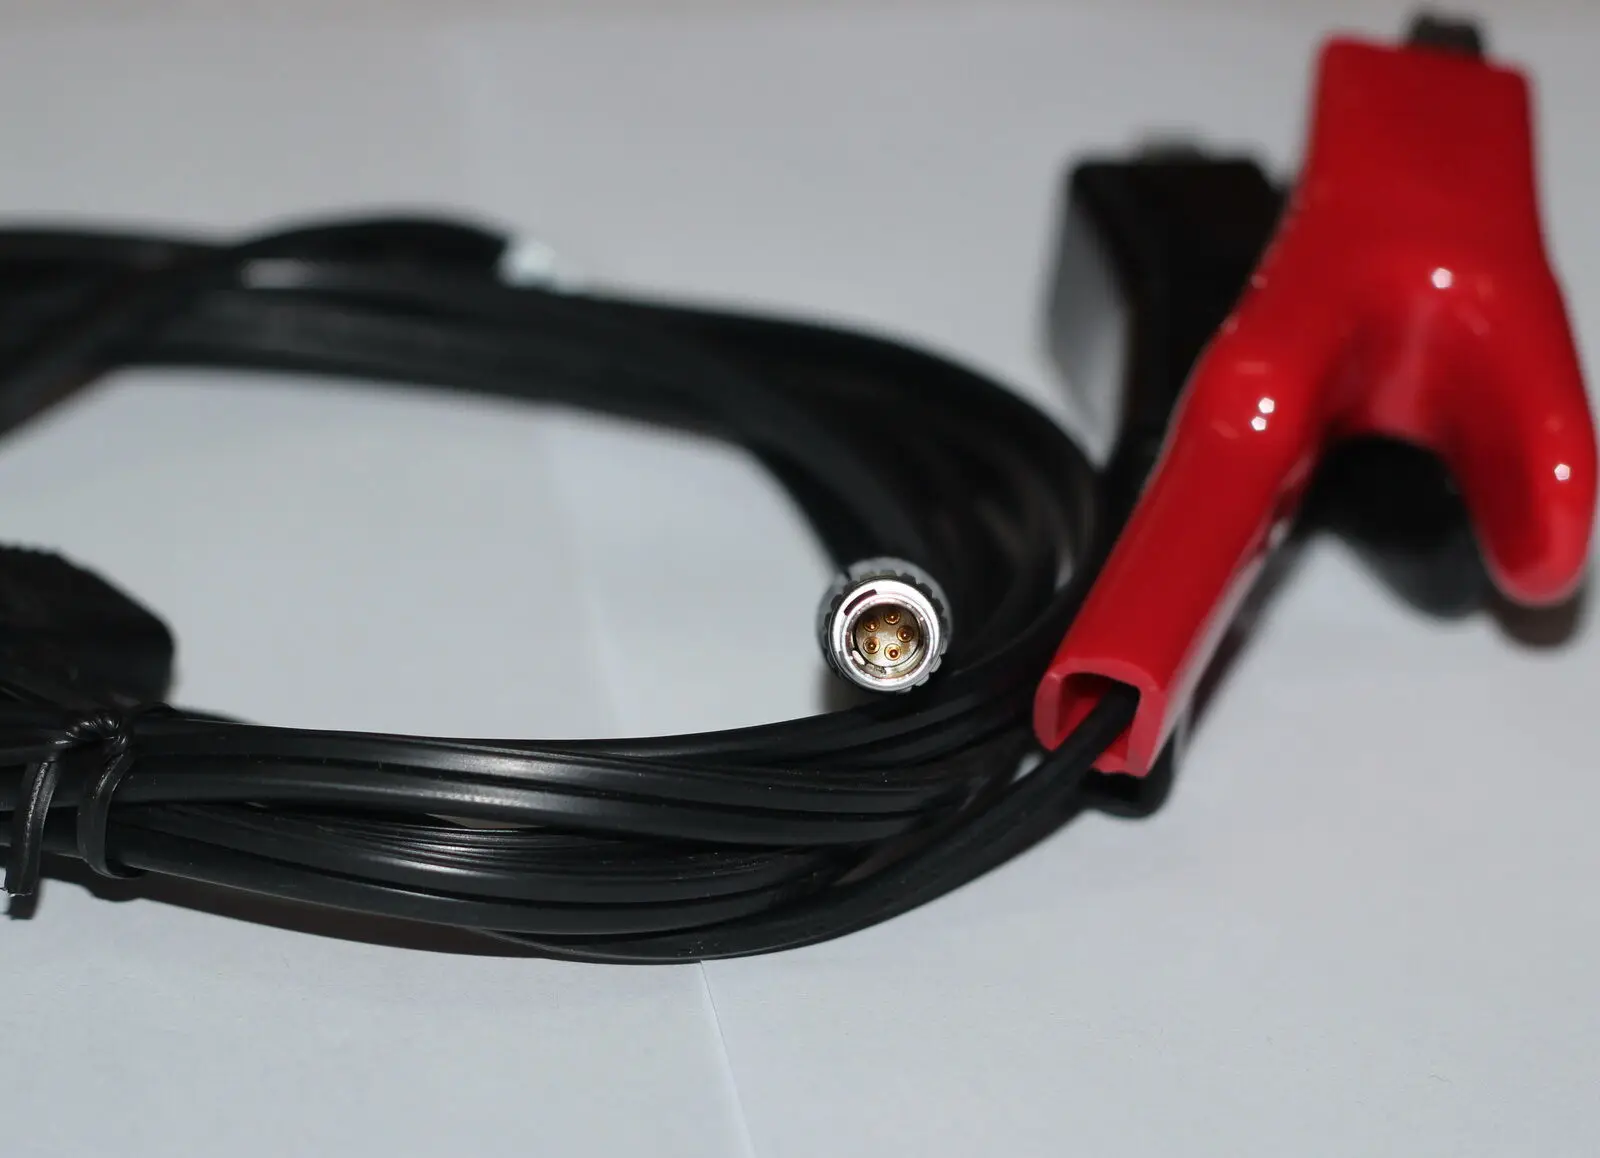 

BRAND NEW Power Cable for Leica total station 5-pin (1B) wire to Alligator clips